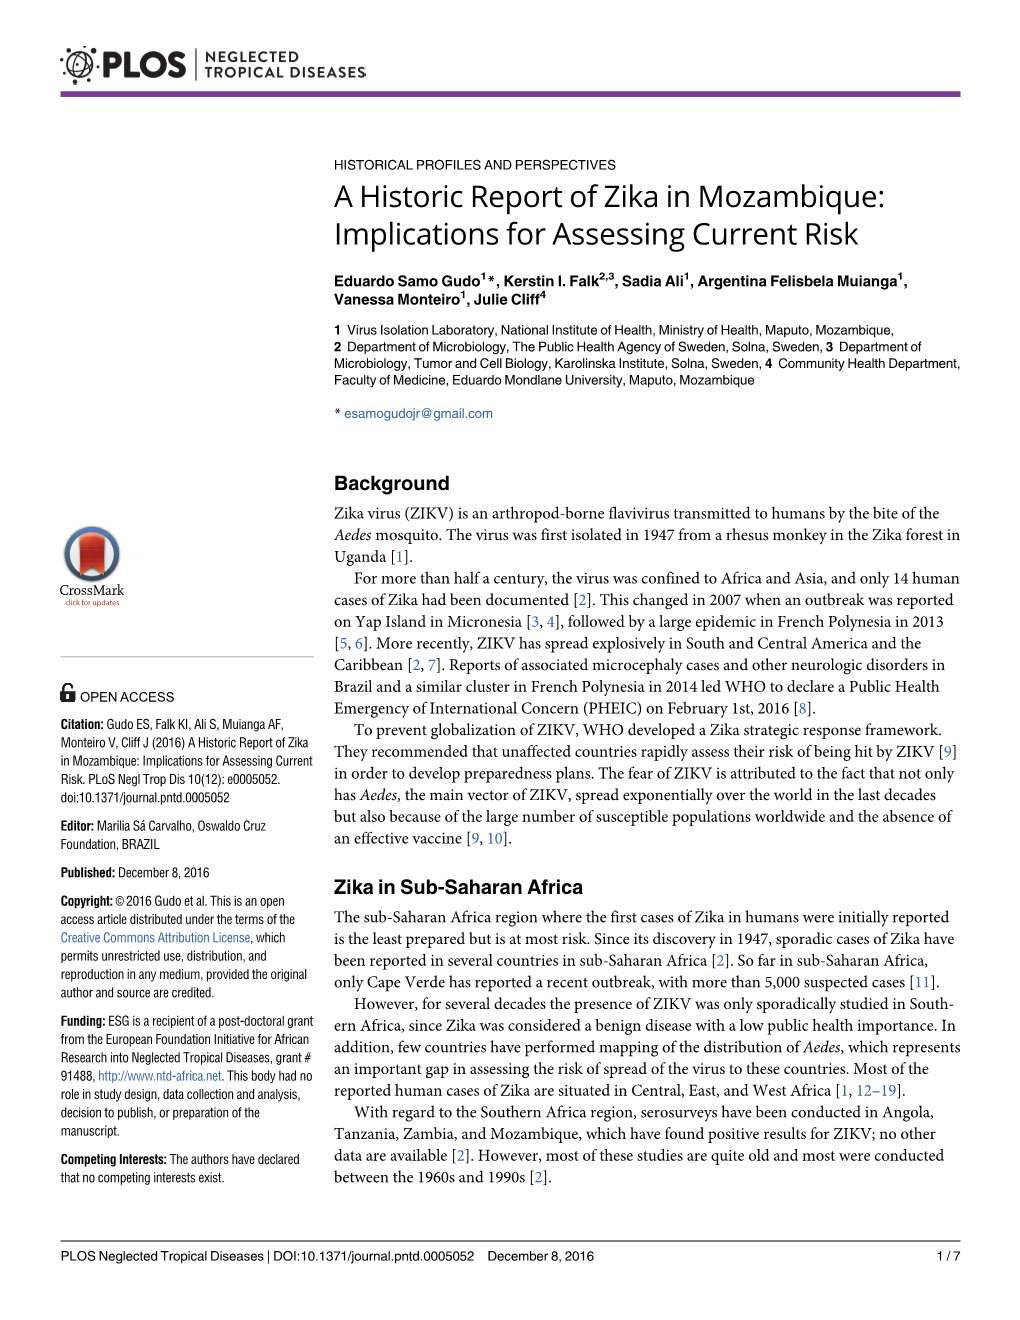 A Historic Report of Zika in Mozambique: Implications for Assessing Current Risk